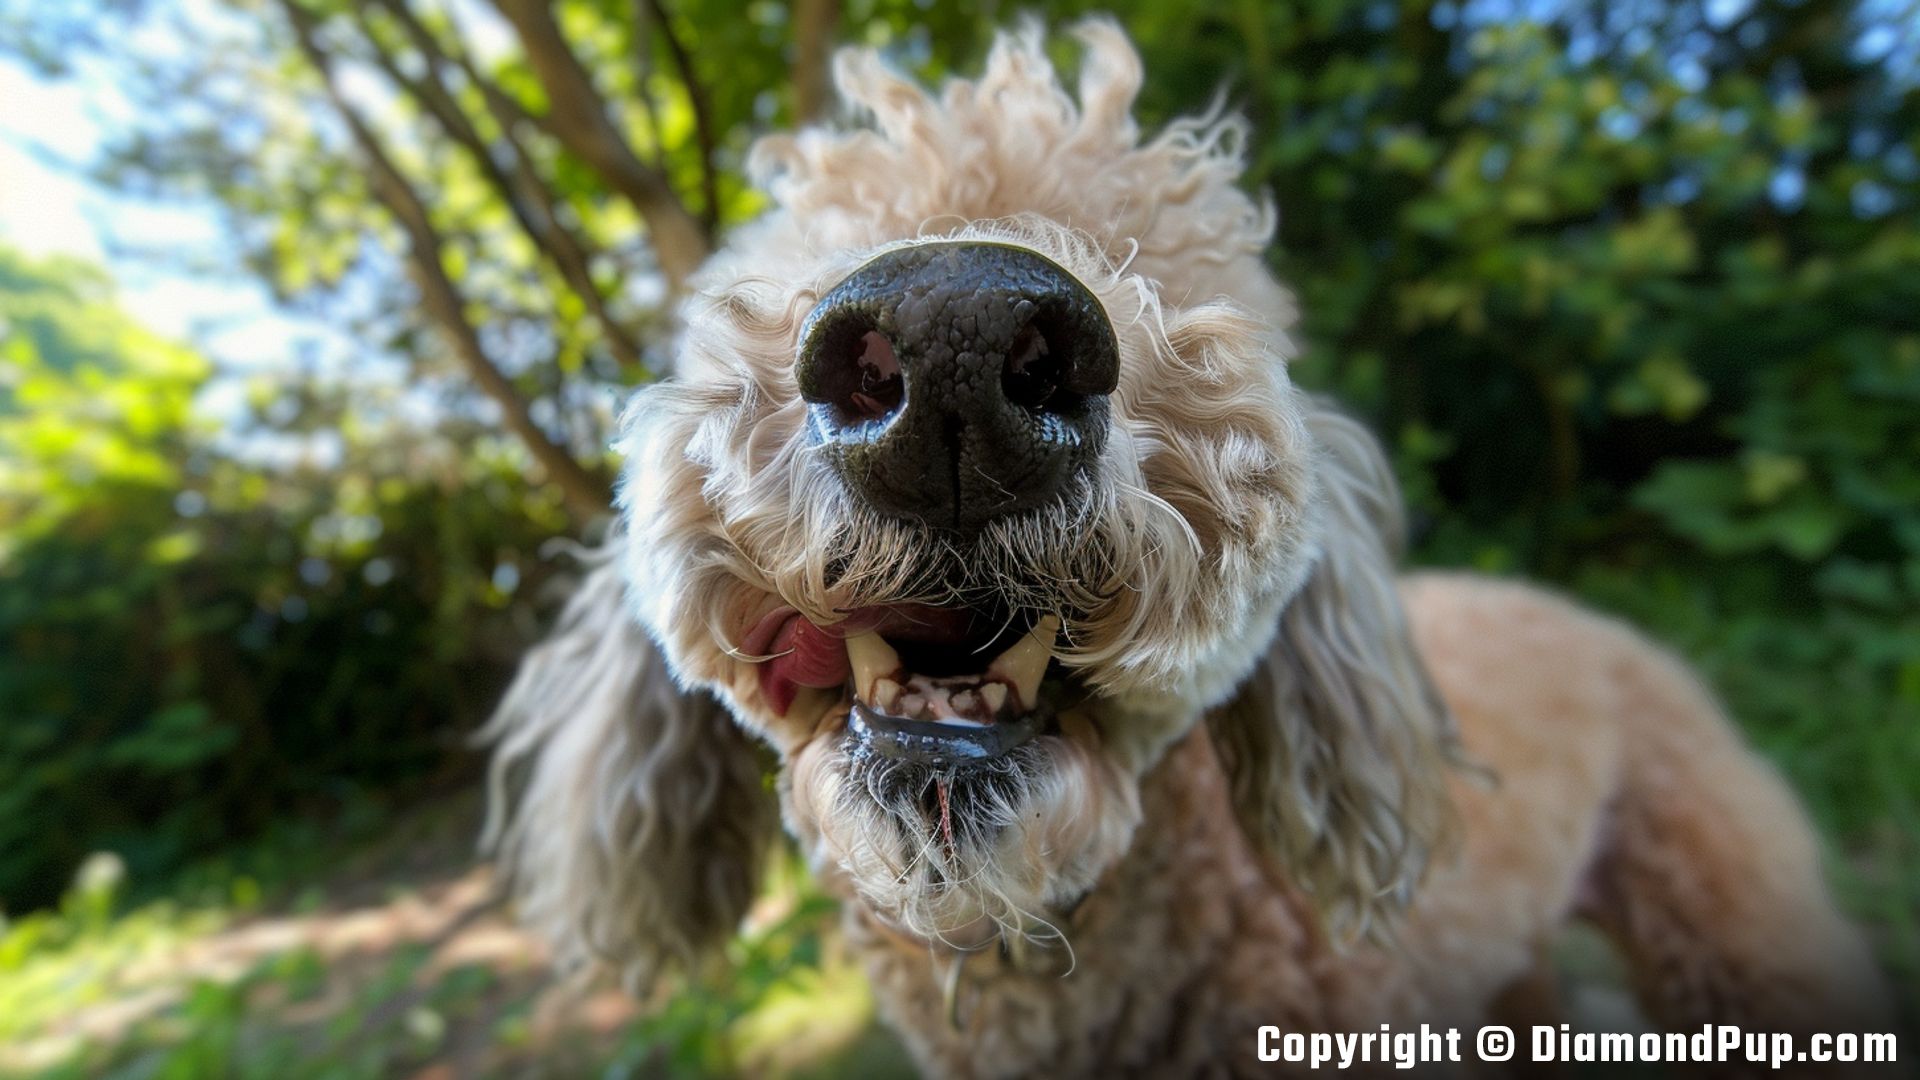 Photograph of an Adorable Poodle Eating Peaches